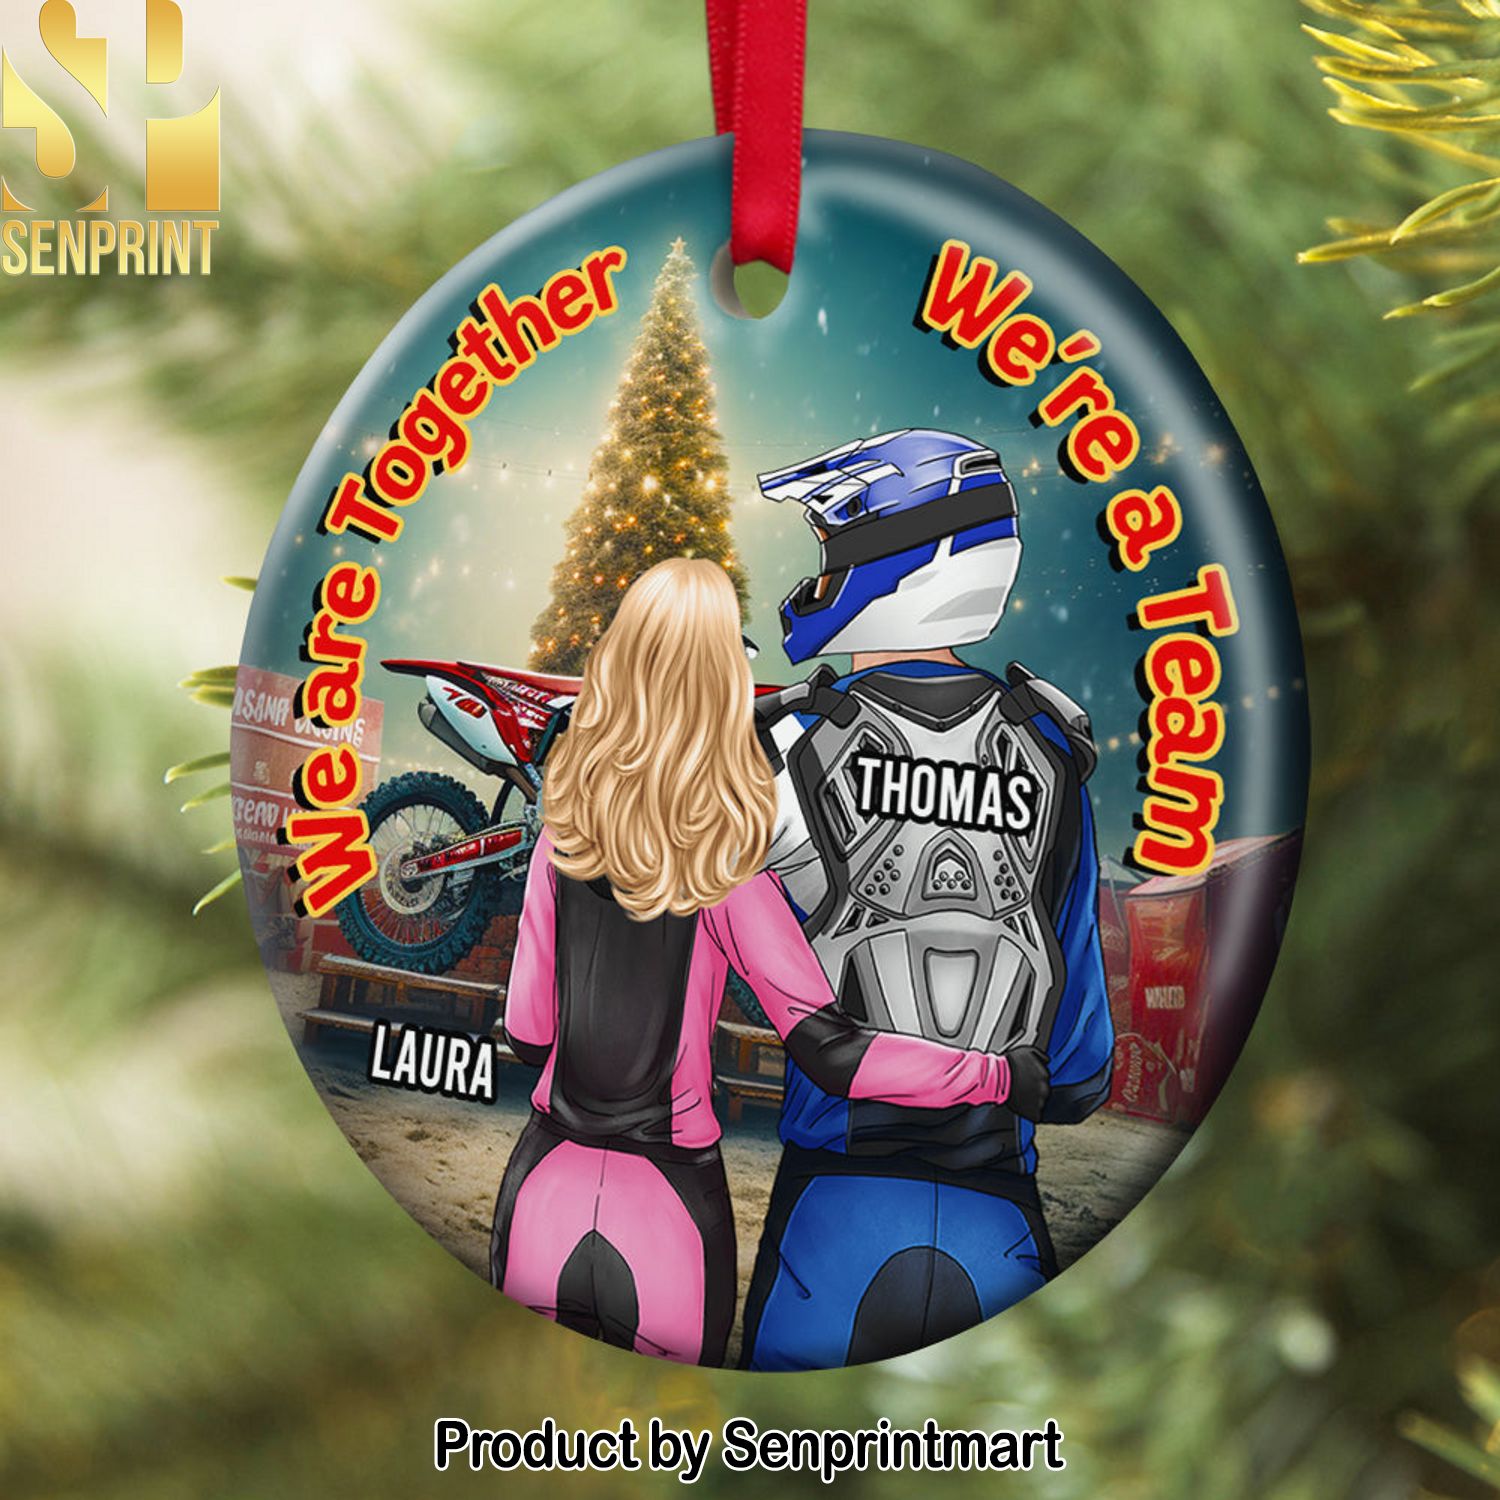 Motocross Couple We’re Together We’re A Team, Personalized Ornament, Gifts For Couple